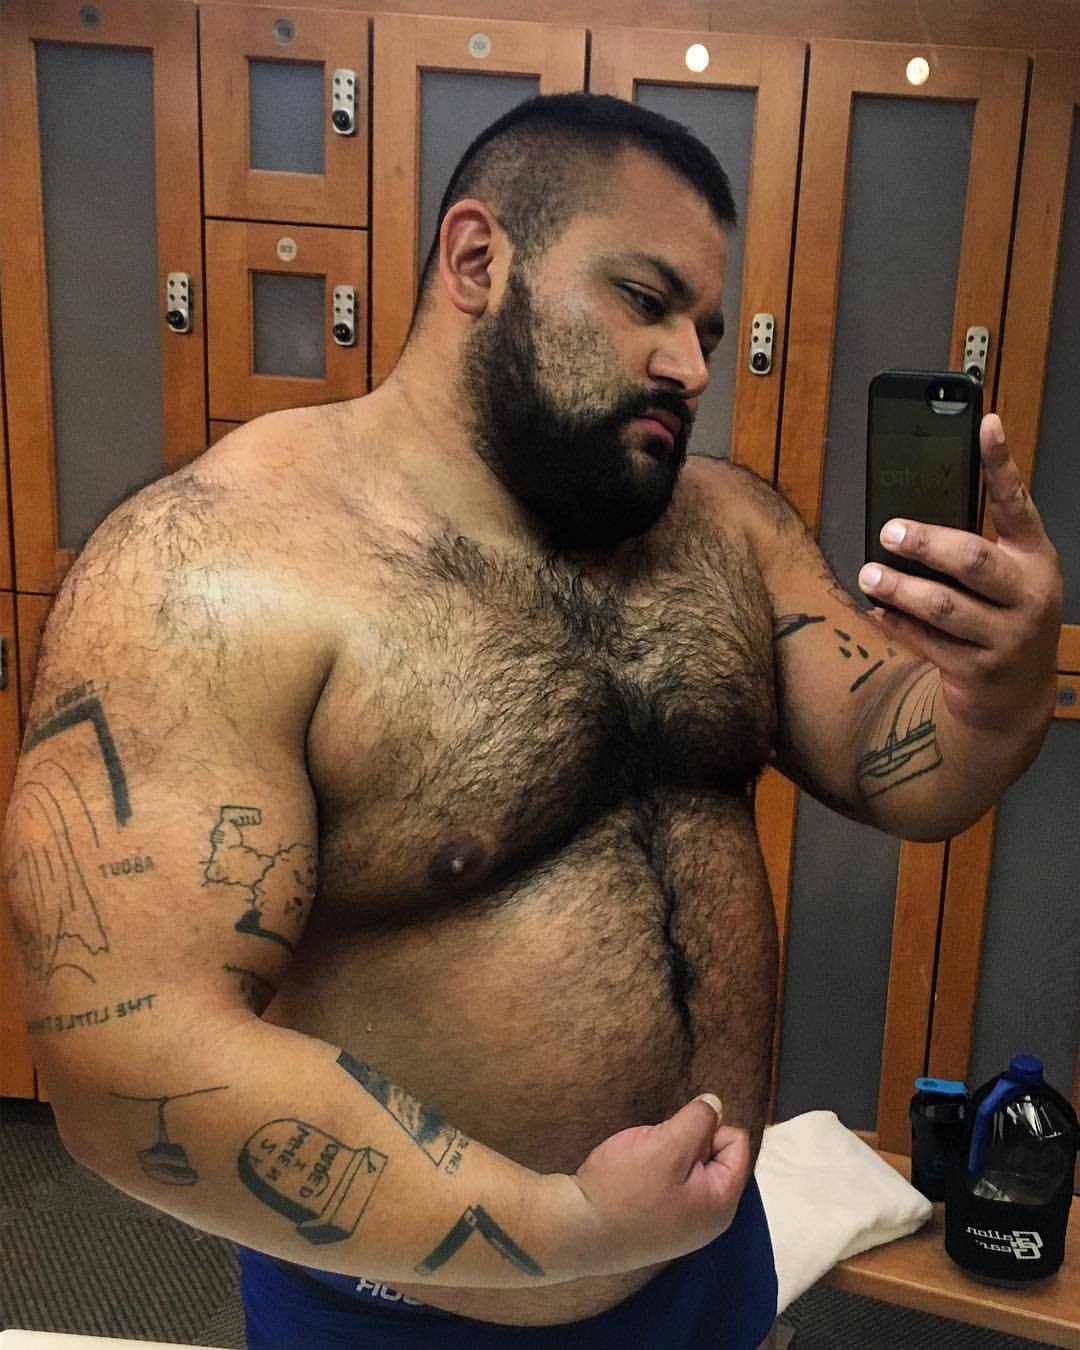 juancho-uzumaki:  strongbearsbr:  Strong Bears BRVisit and buy male toys at Fort